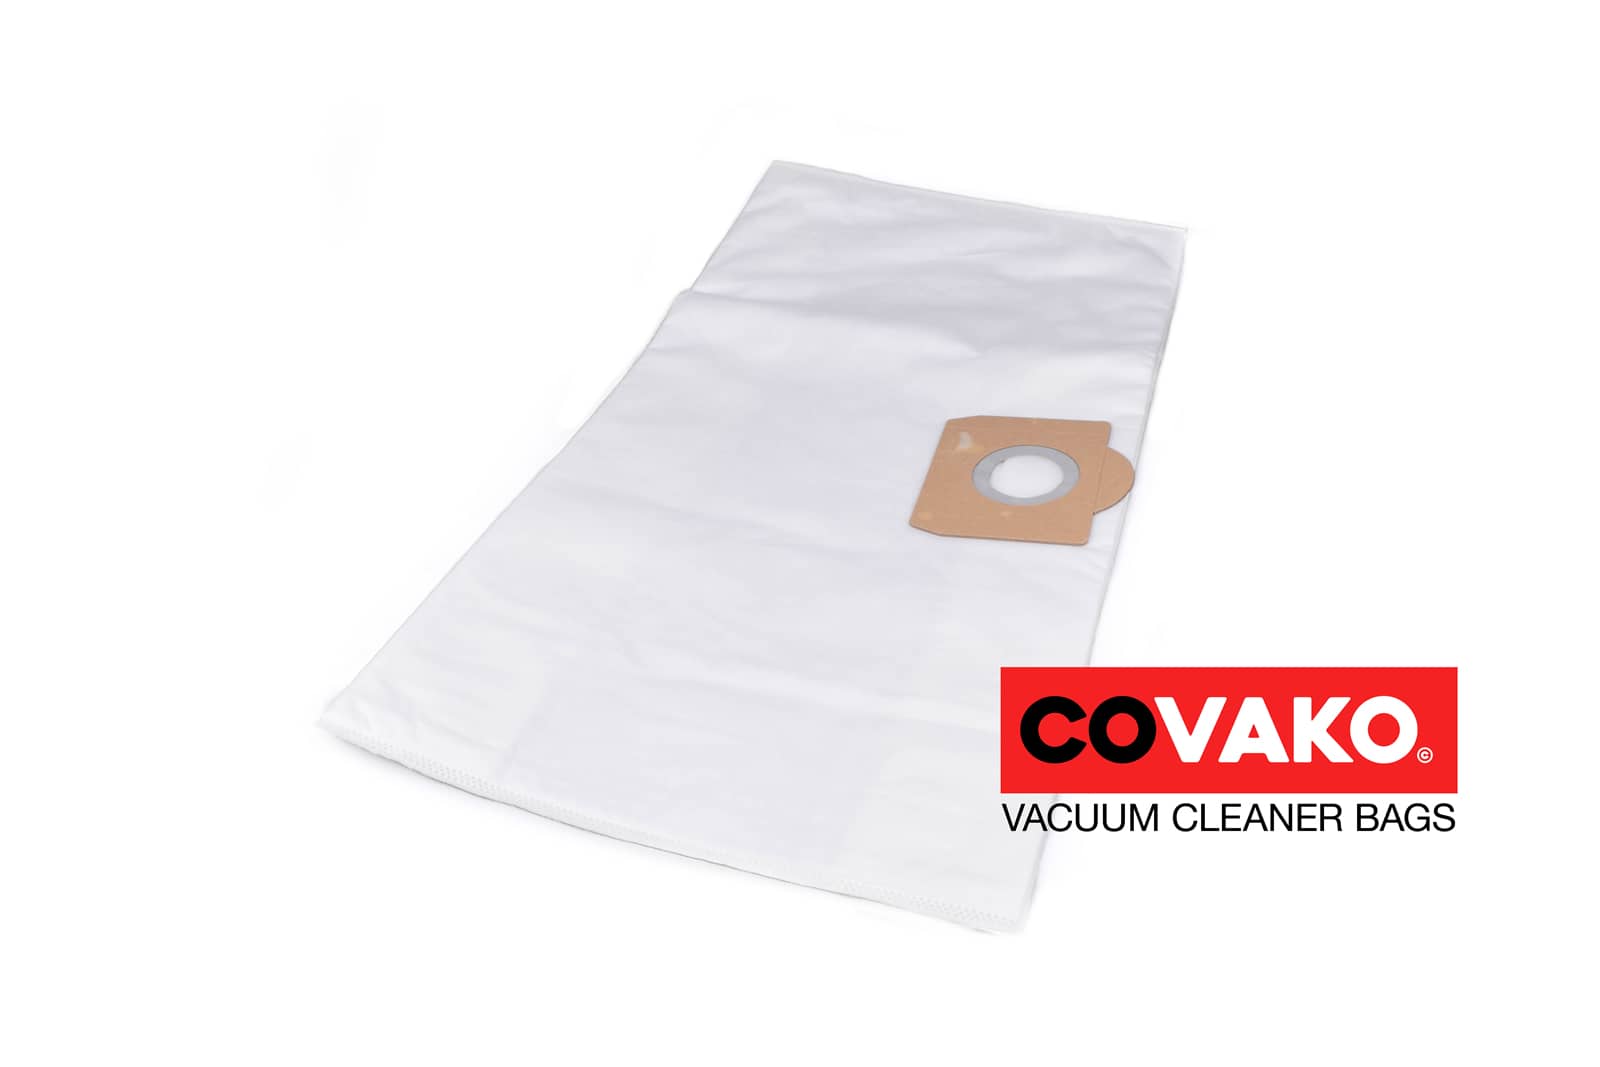 Wirbel 829 L / Synthesis - Wirbel vacuum cleaner bags